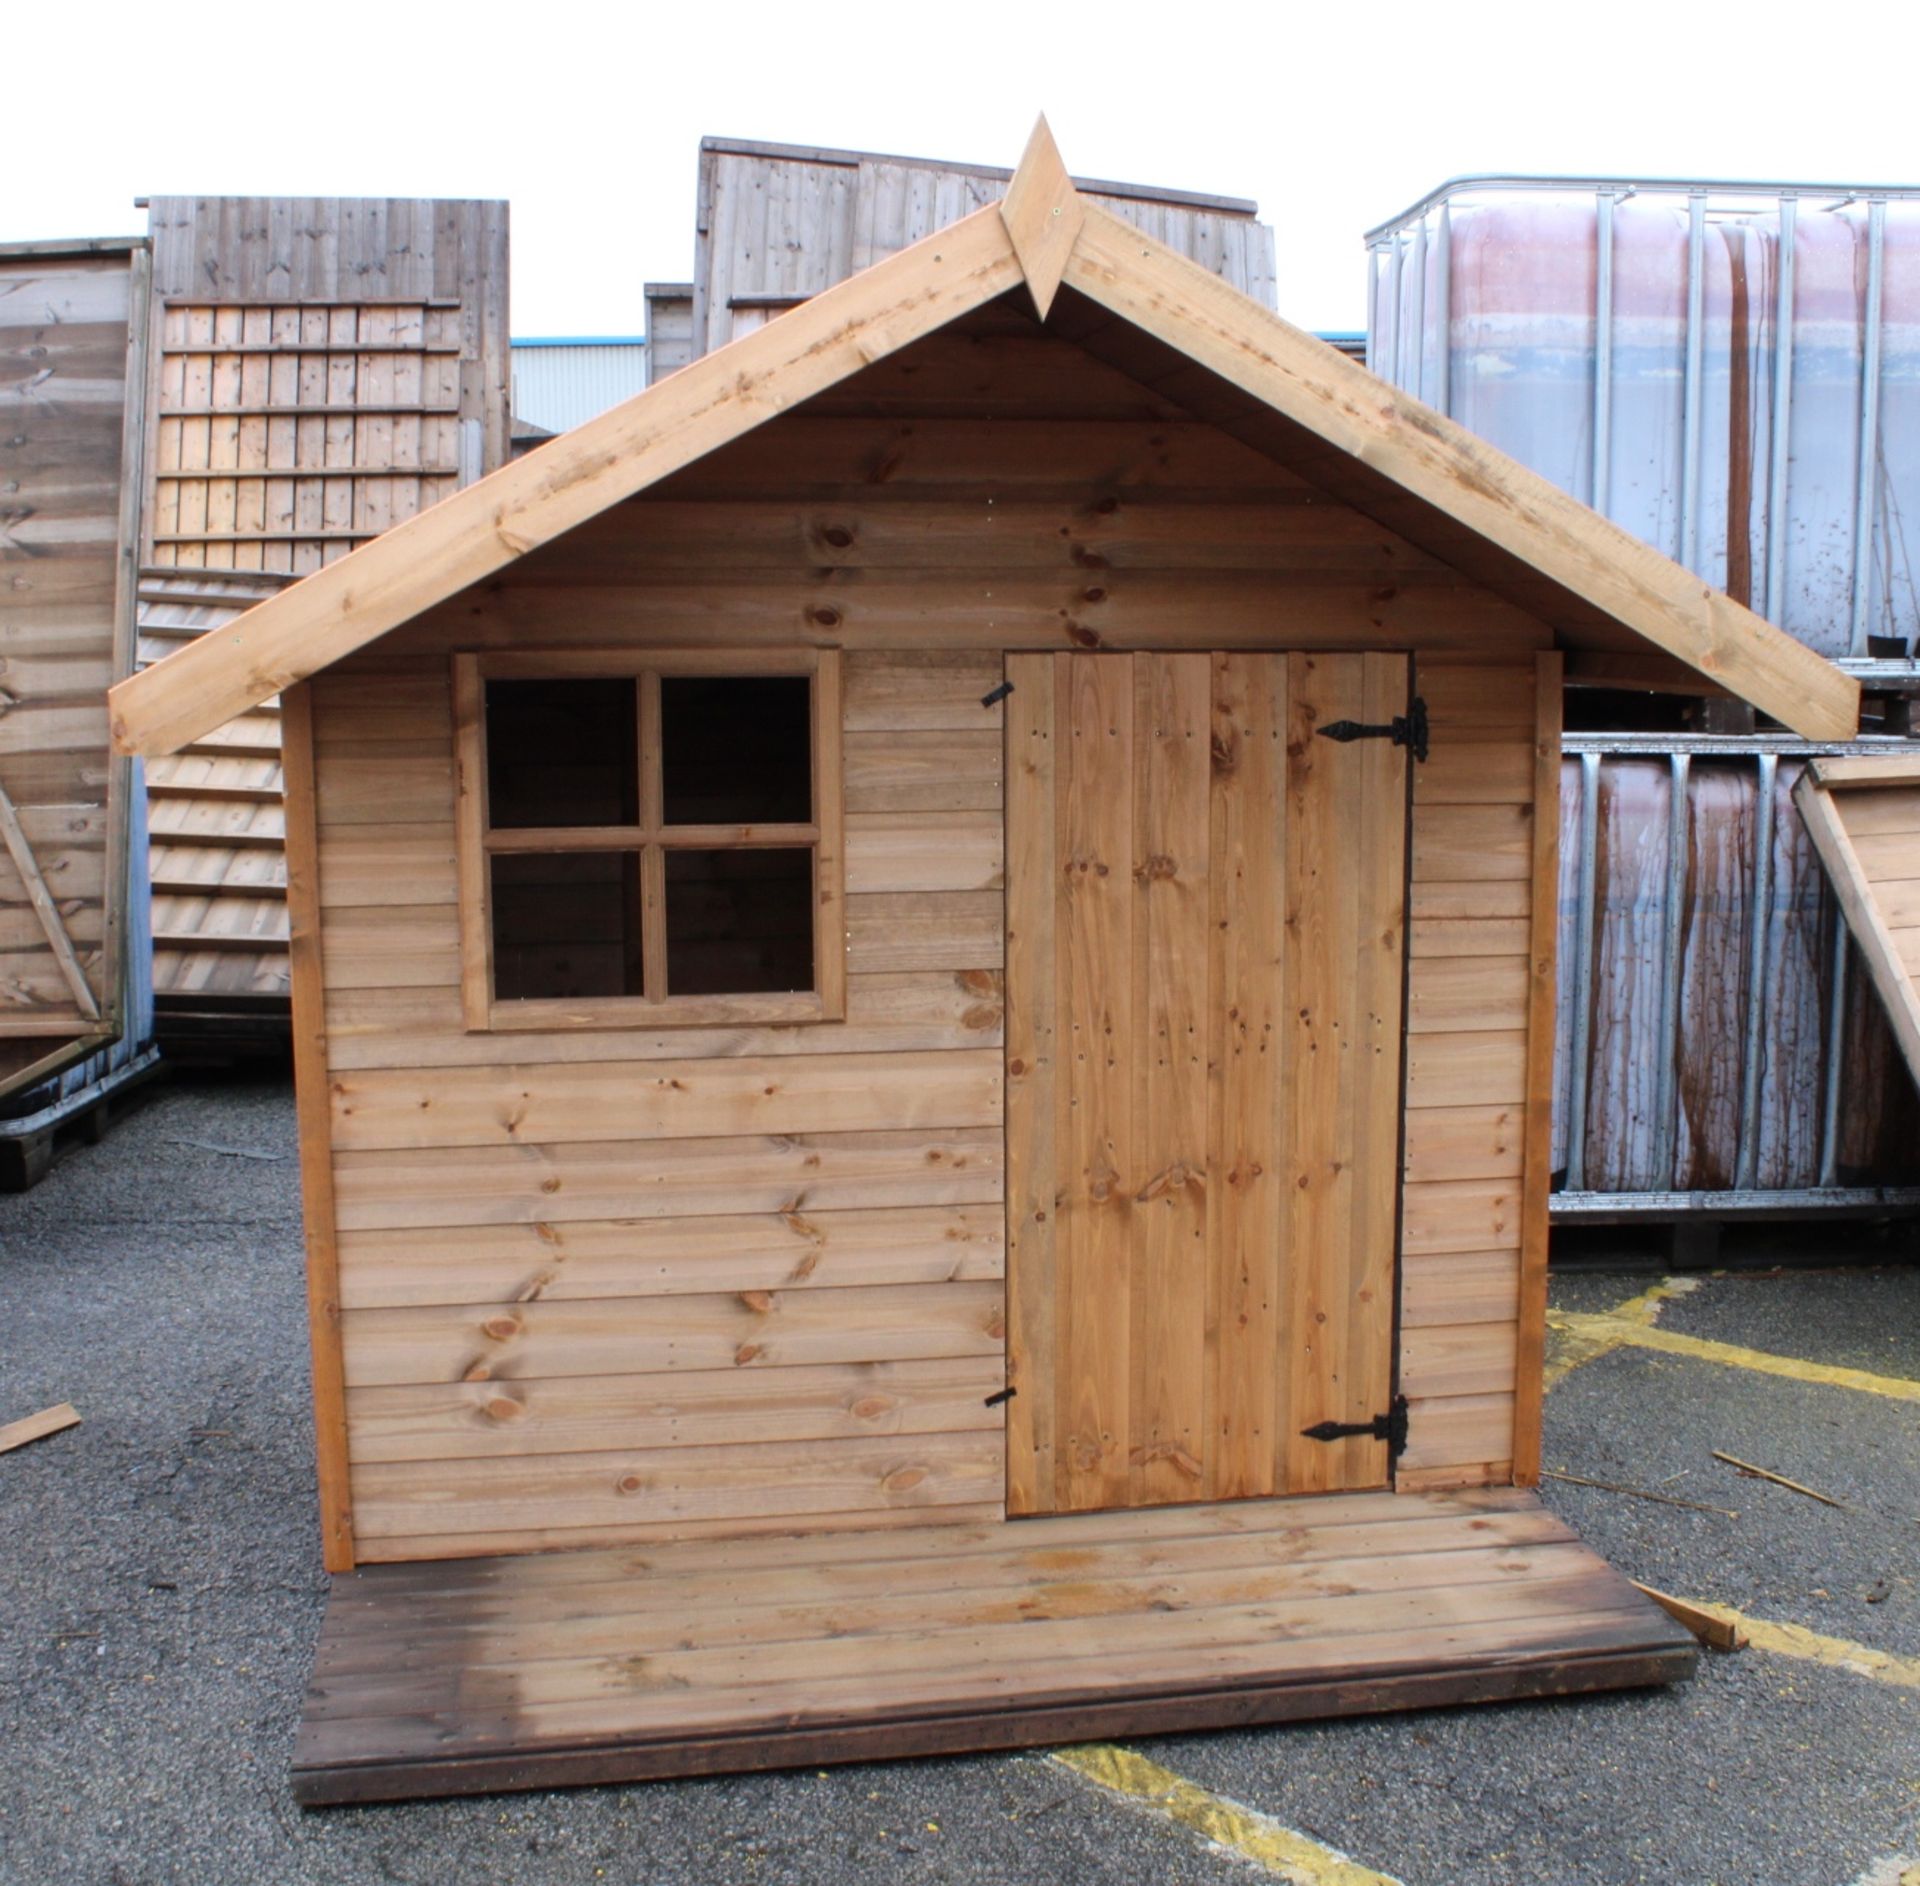 4x6 kids playhouse with overhang and veranda, Stnadrad 16mm Nominal Cladding - Image 3 of 5